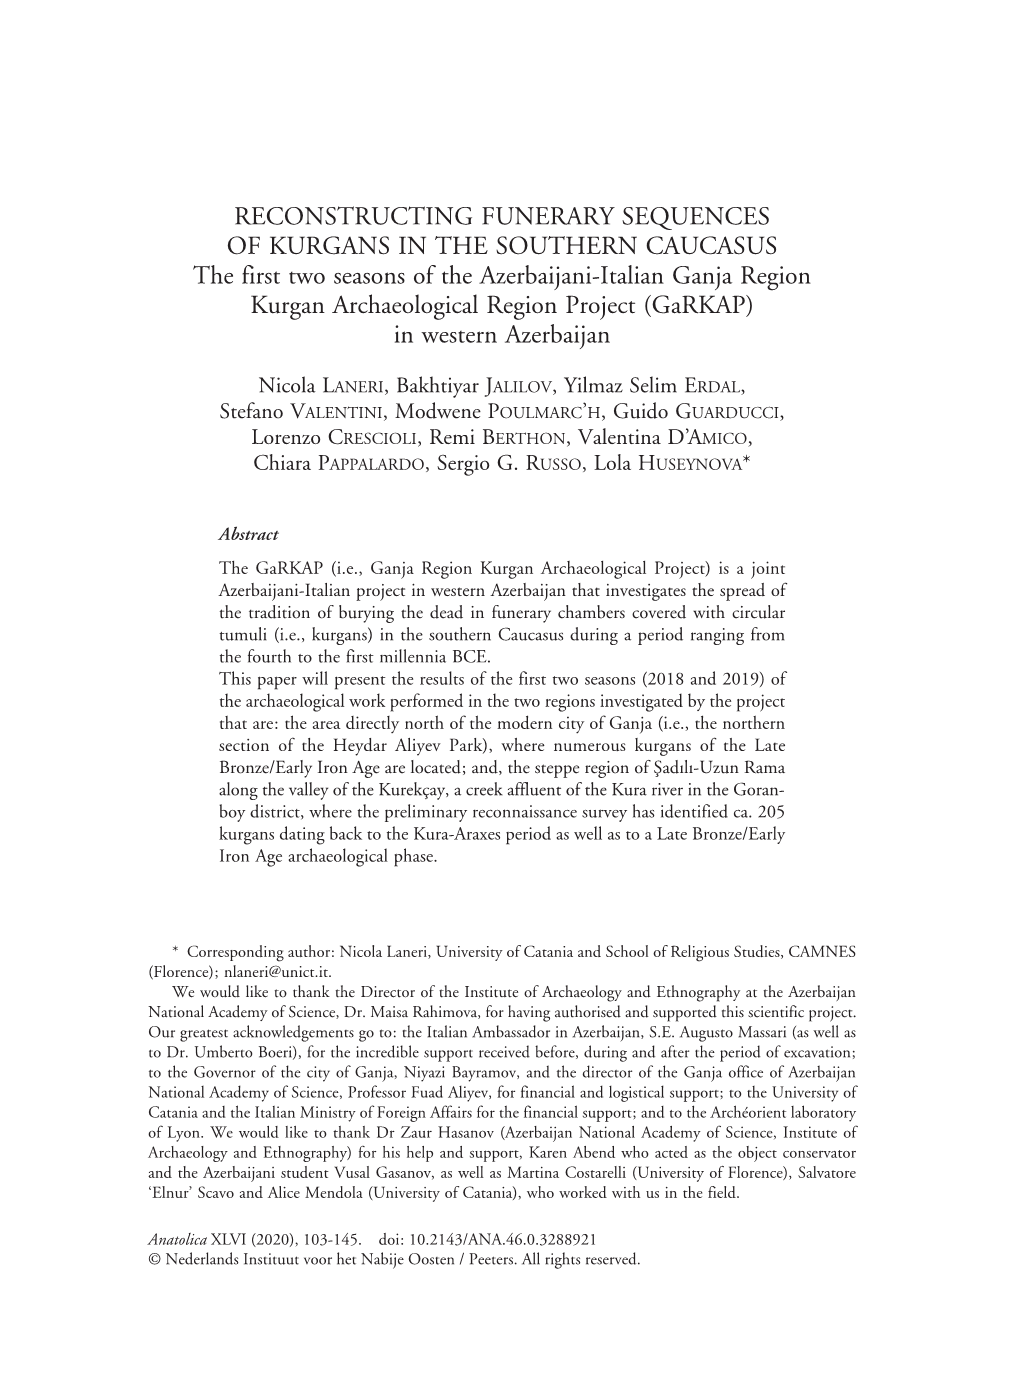 RECONSTRUCTING FUNERARY SEQUENCES of KURGANS in the SOUTHERN CAUCASUS the First Two Seasons of the Azerbaijani-Italian Ganja